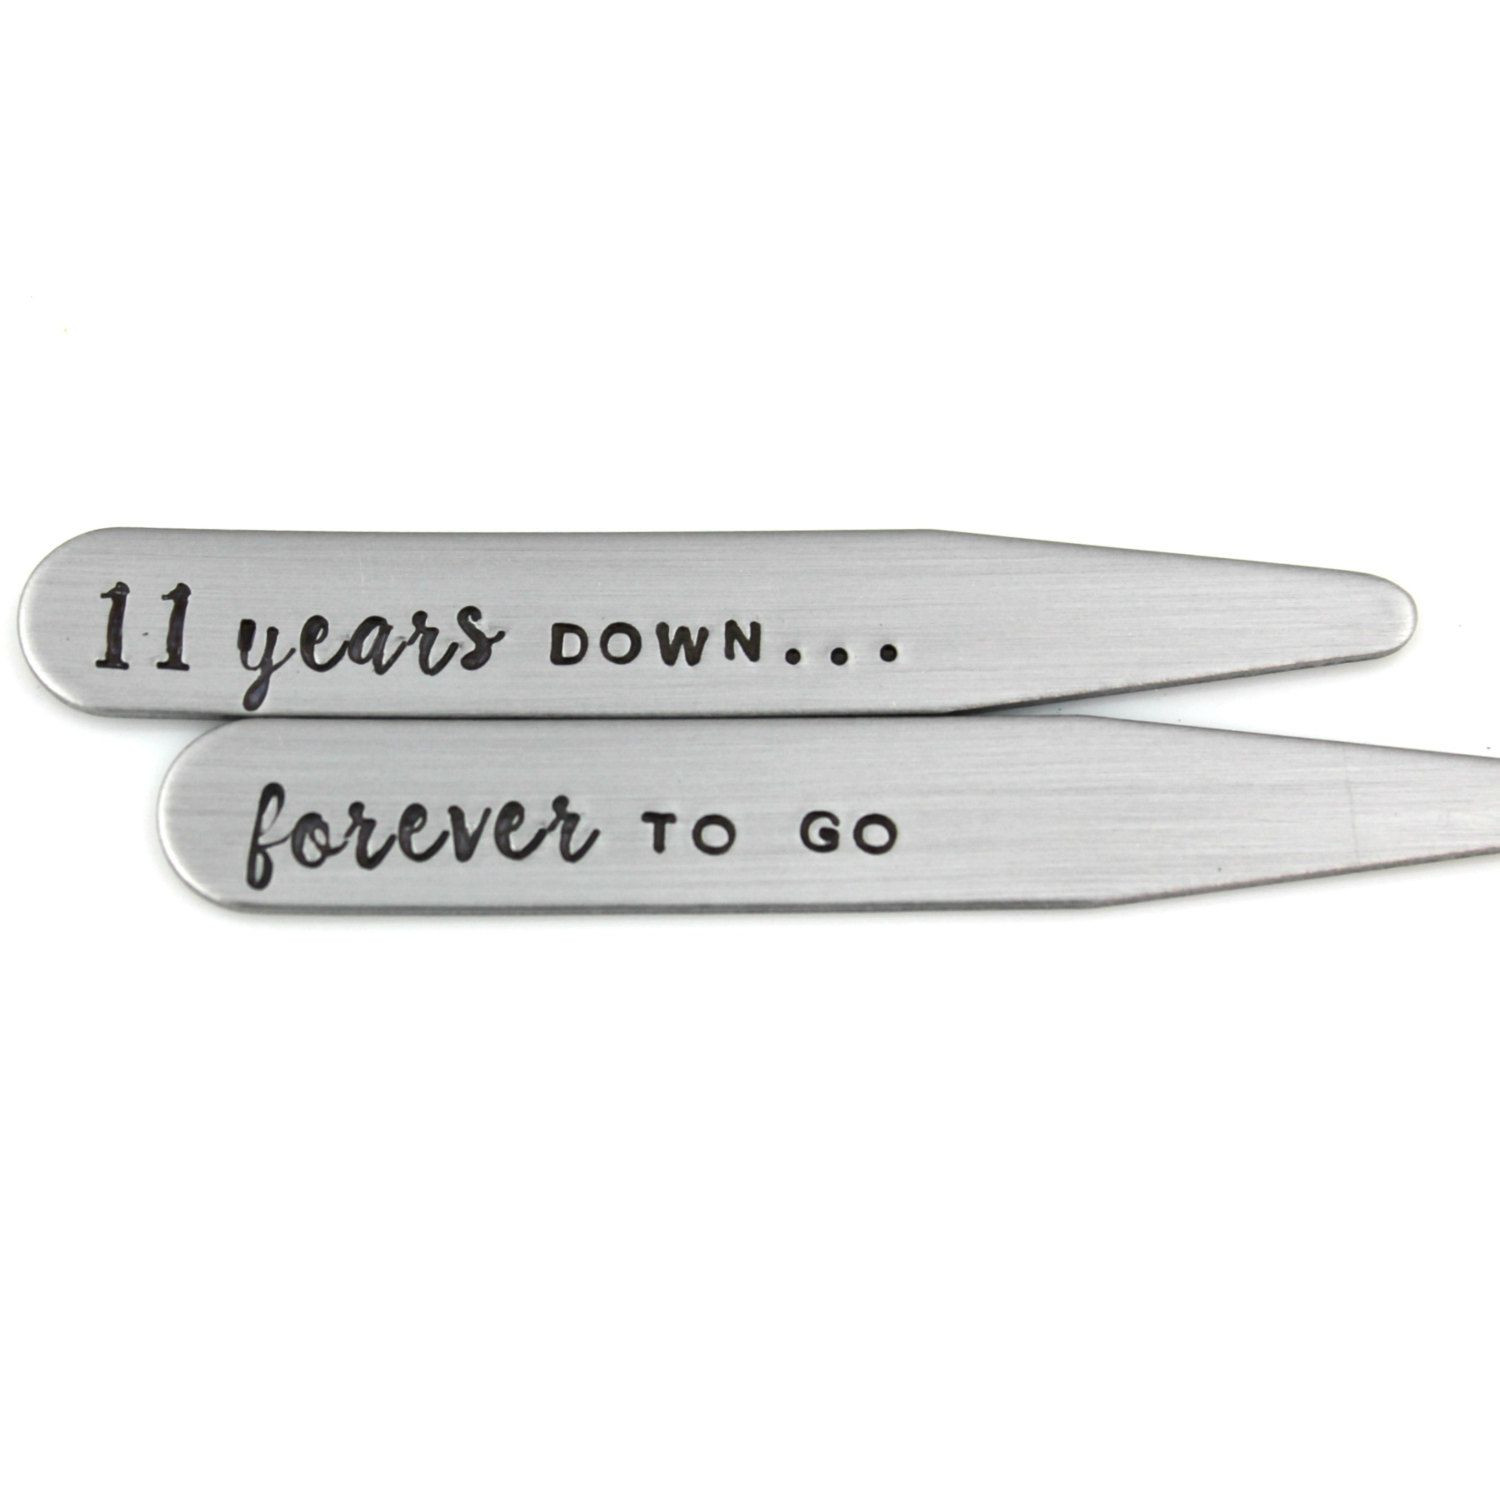 Steel Anniversary Gift Ideas
 GIVE THE TRADITIONAL GIFT OF STEEL TO YOUR HUSBAND ON YOUR